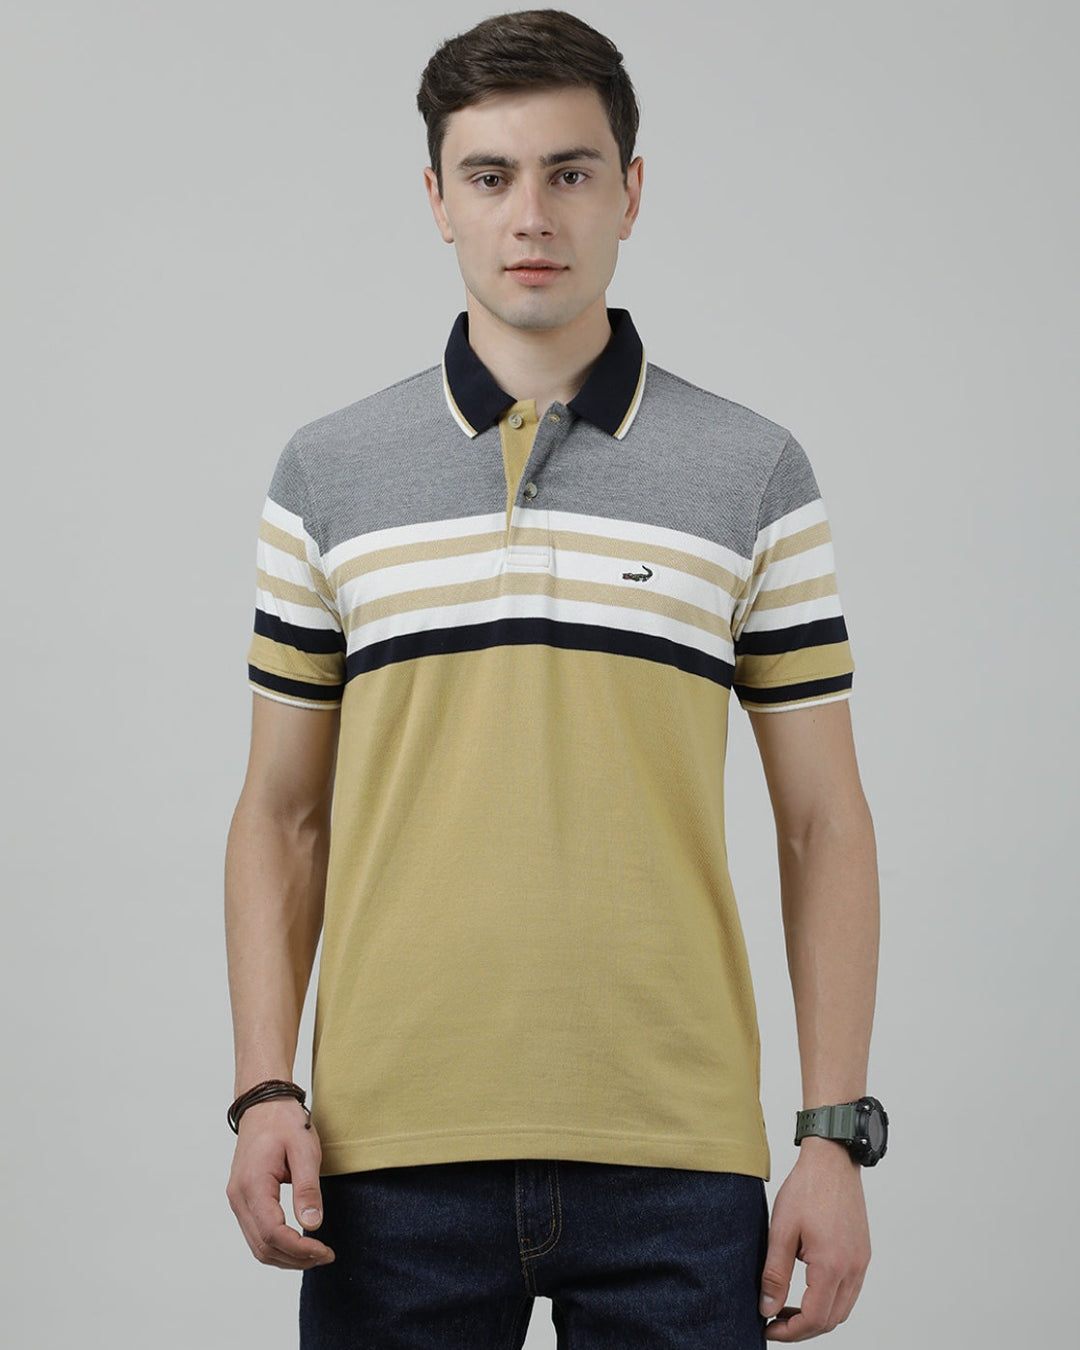 Casual Light Khaki T-Shirt Engineering Stripes Half Sleeve Slim Fit with Collar for Men